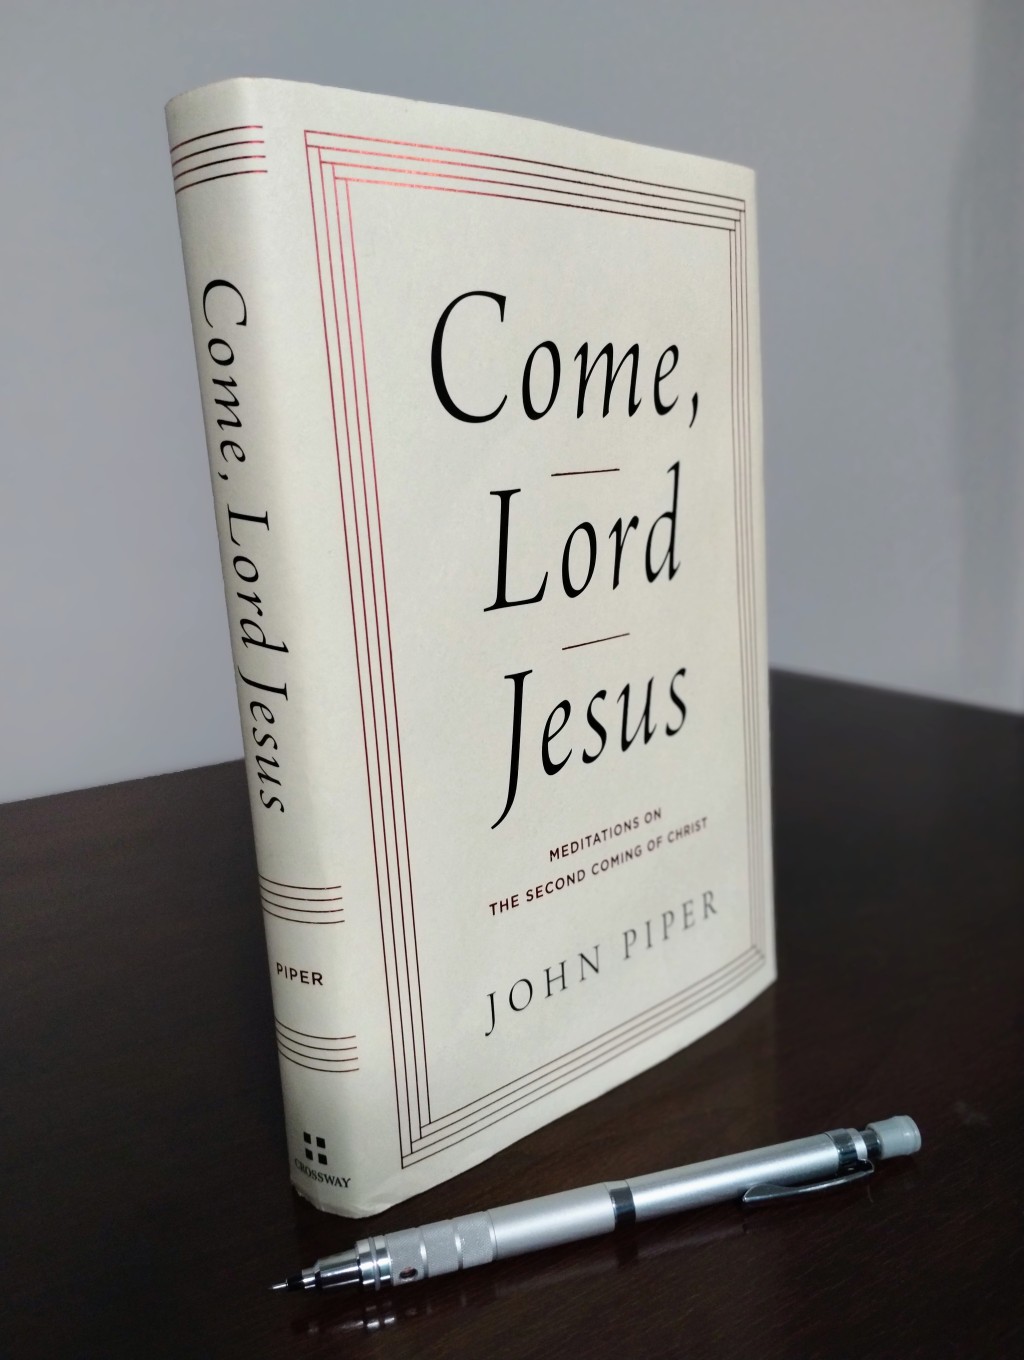 “Come, Lord Jesus” by John Piper | New Book